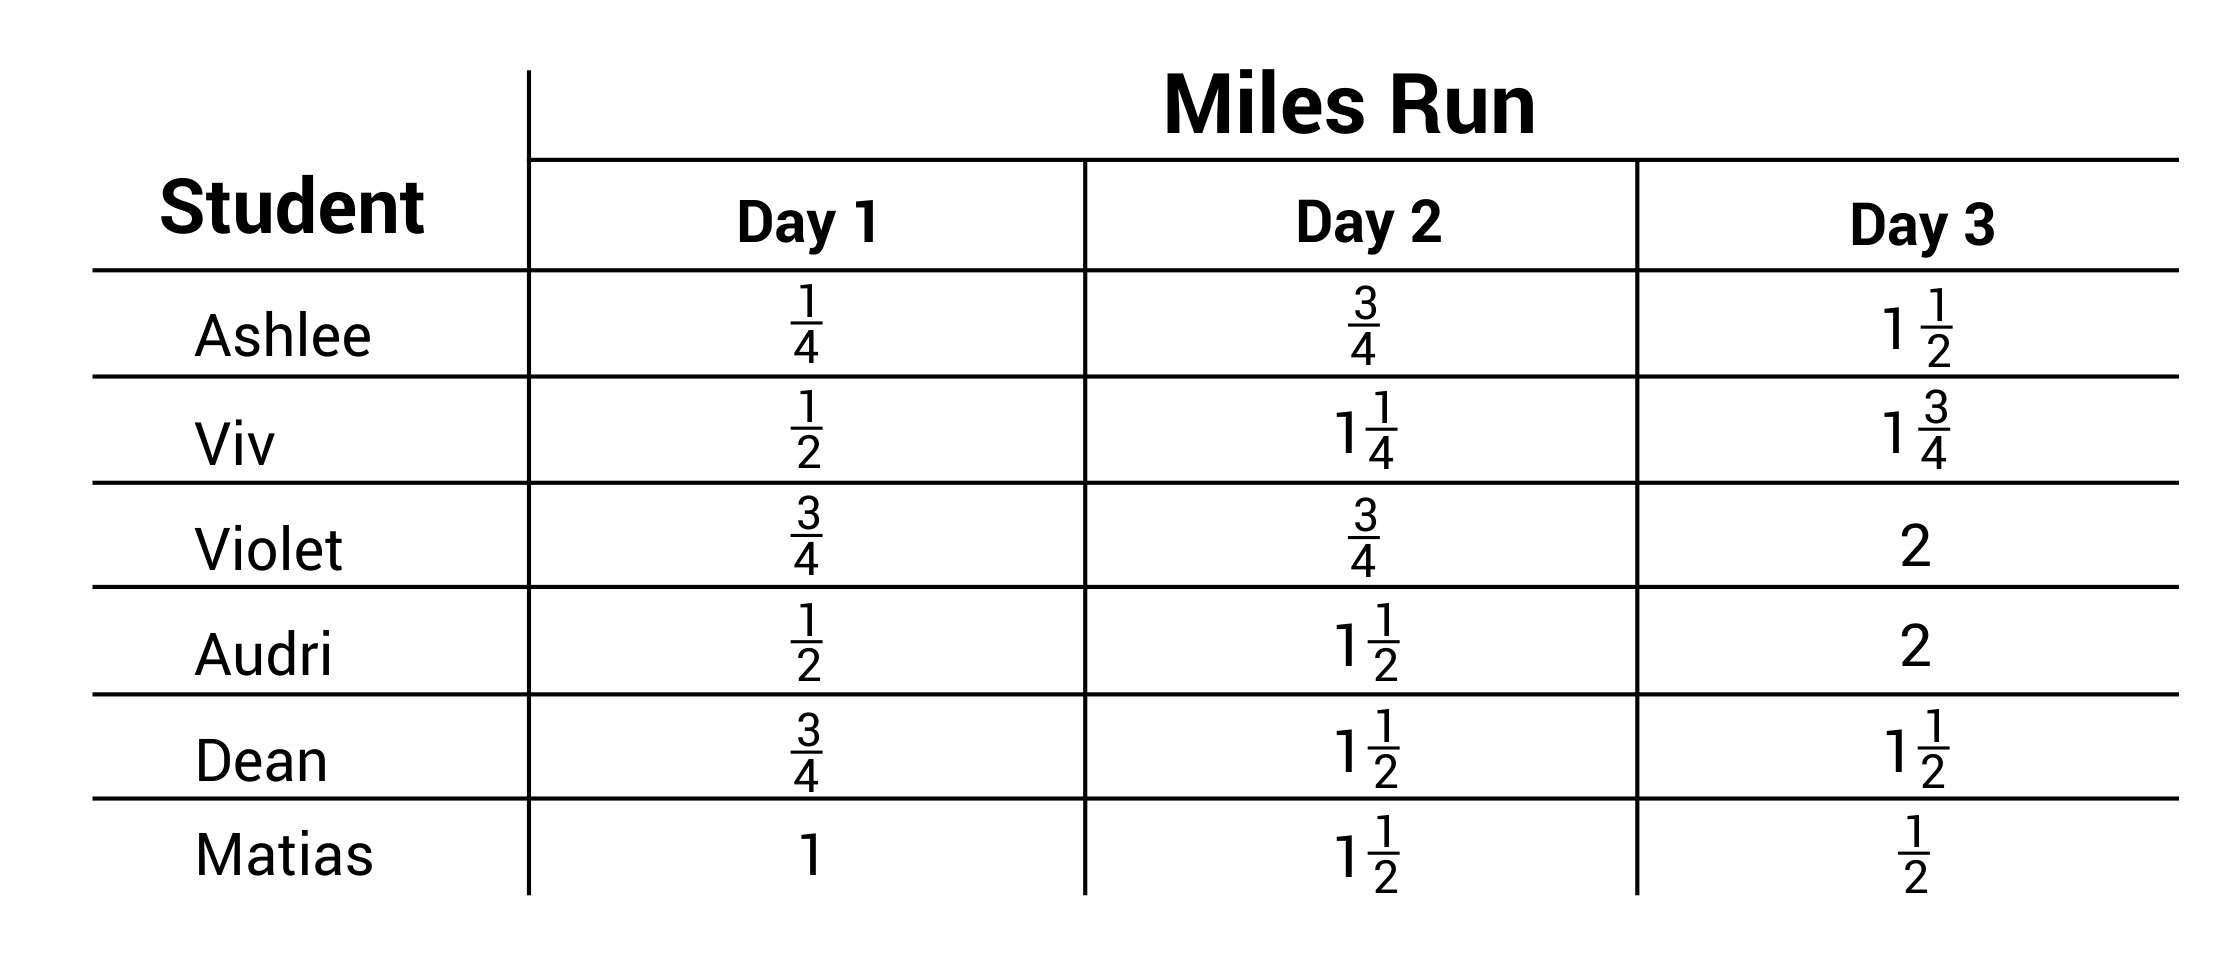 Table of the number of miles run for each student over 3 days